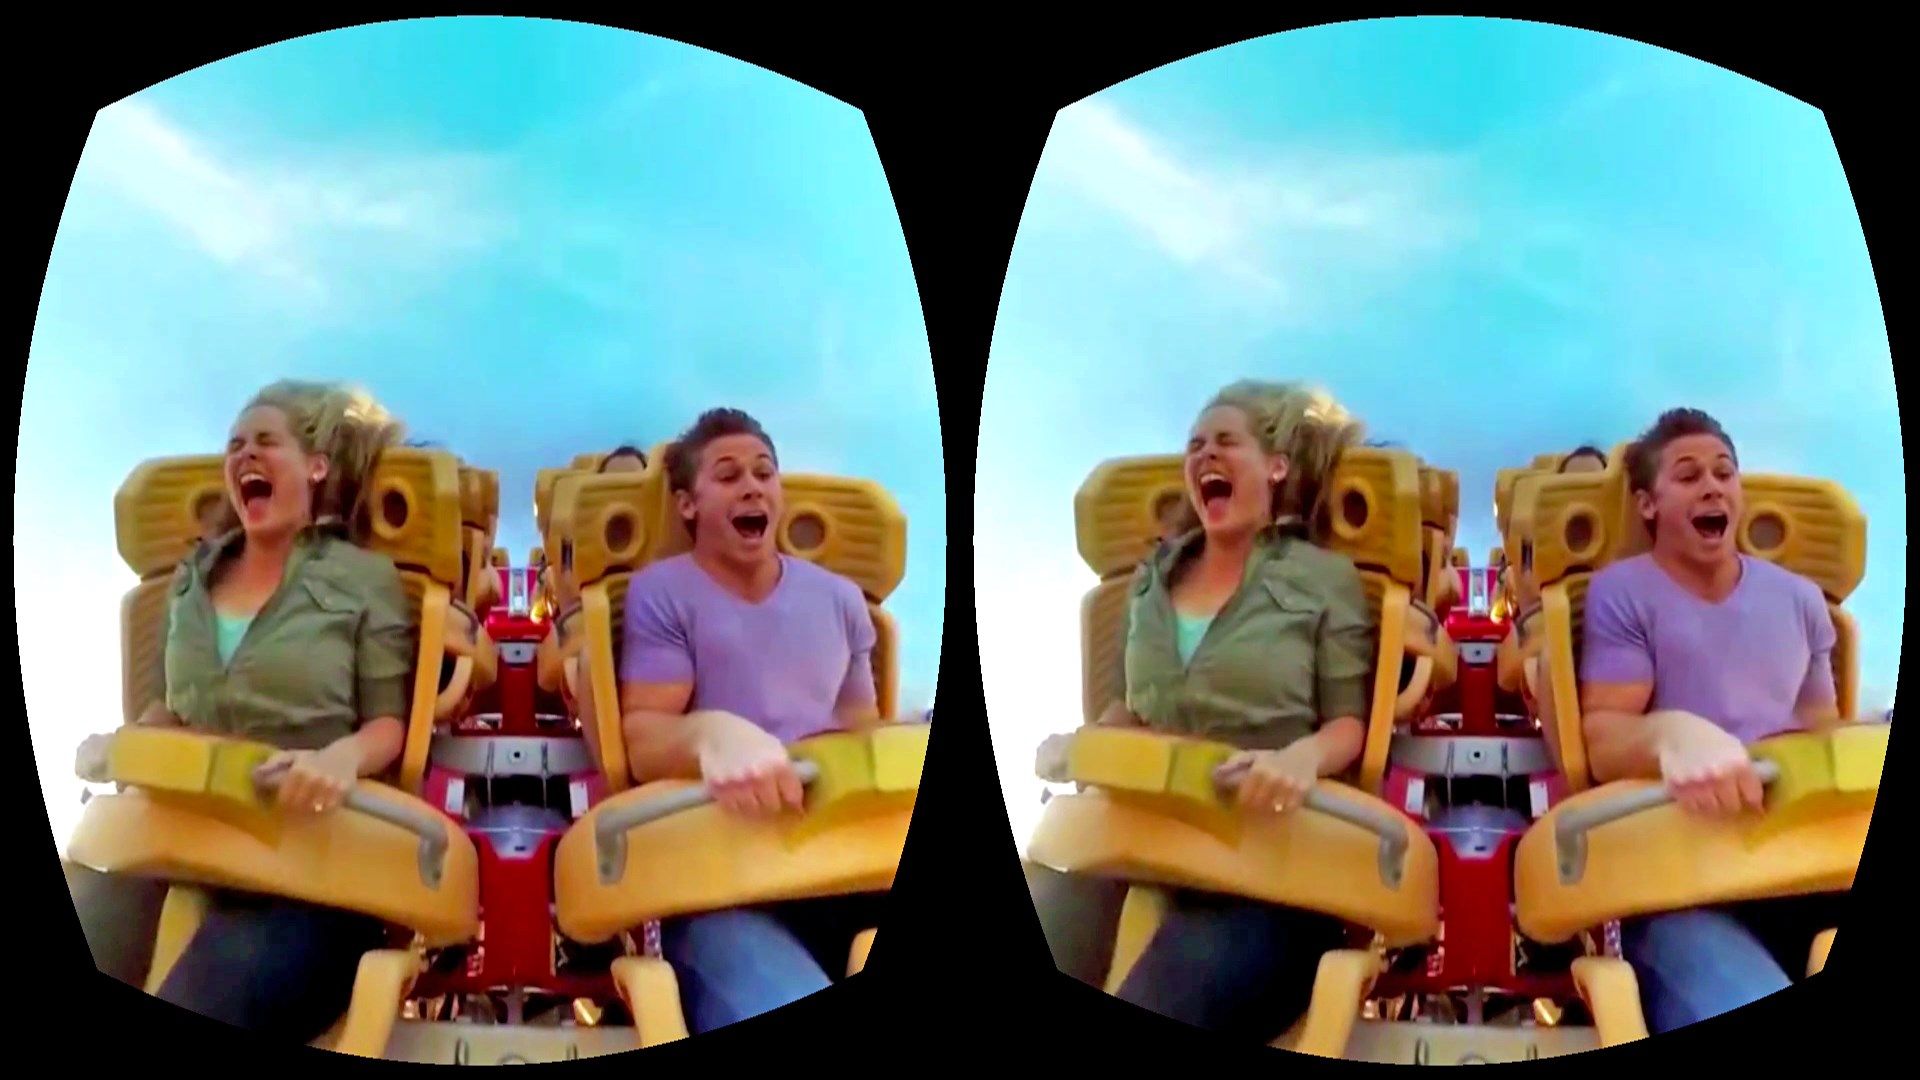 VR Headset view in a Rollercoaster diving